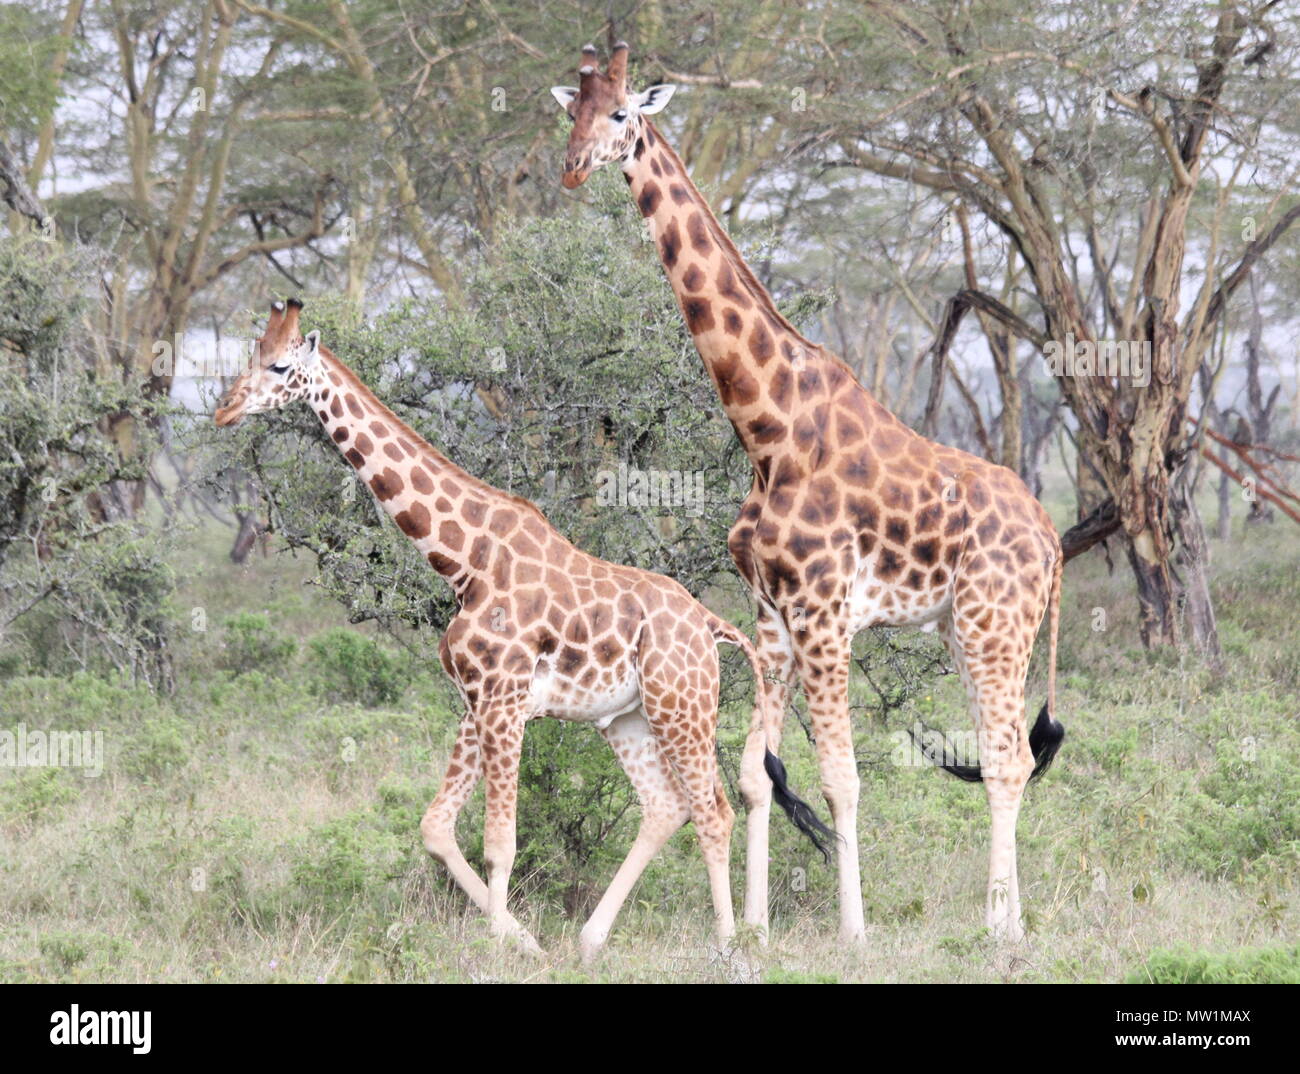 Giraffes walking in front of the trees Stock Photo